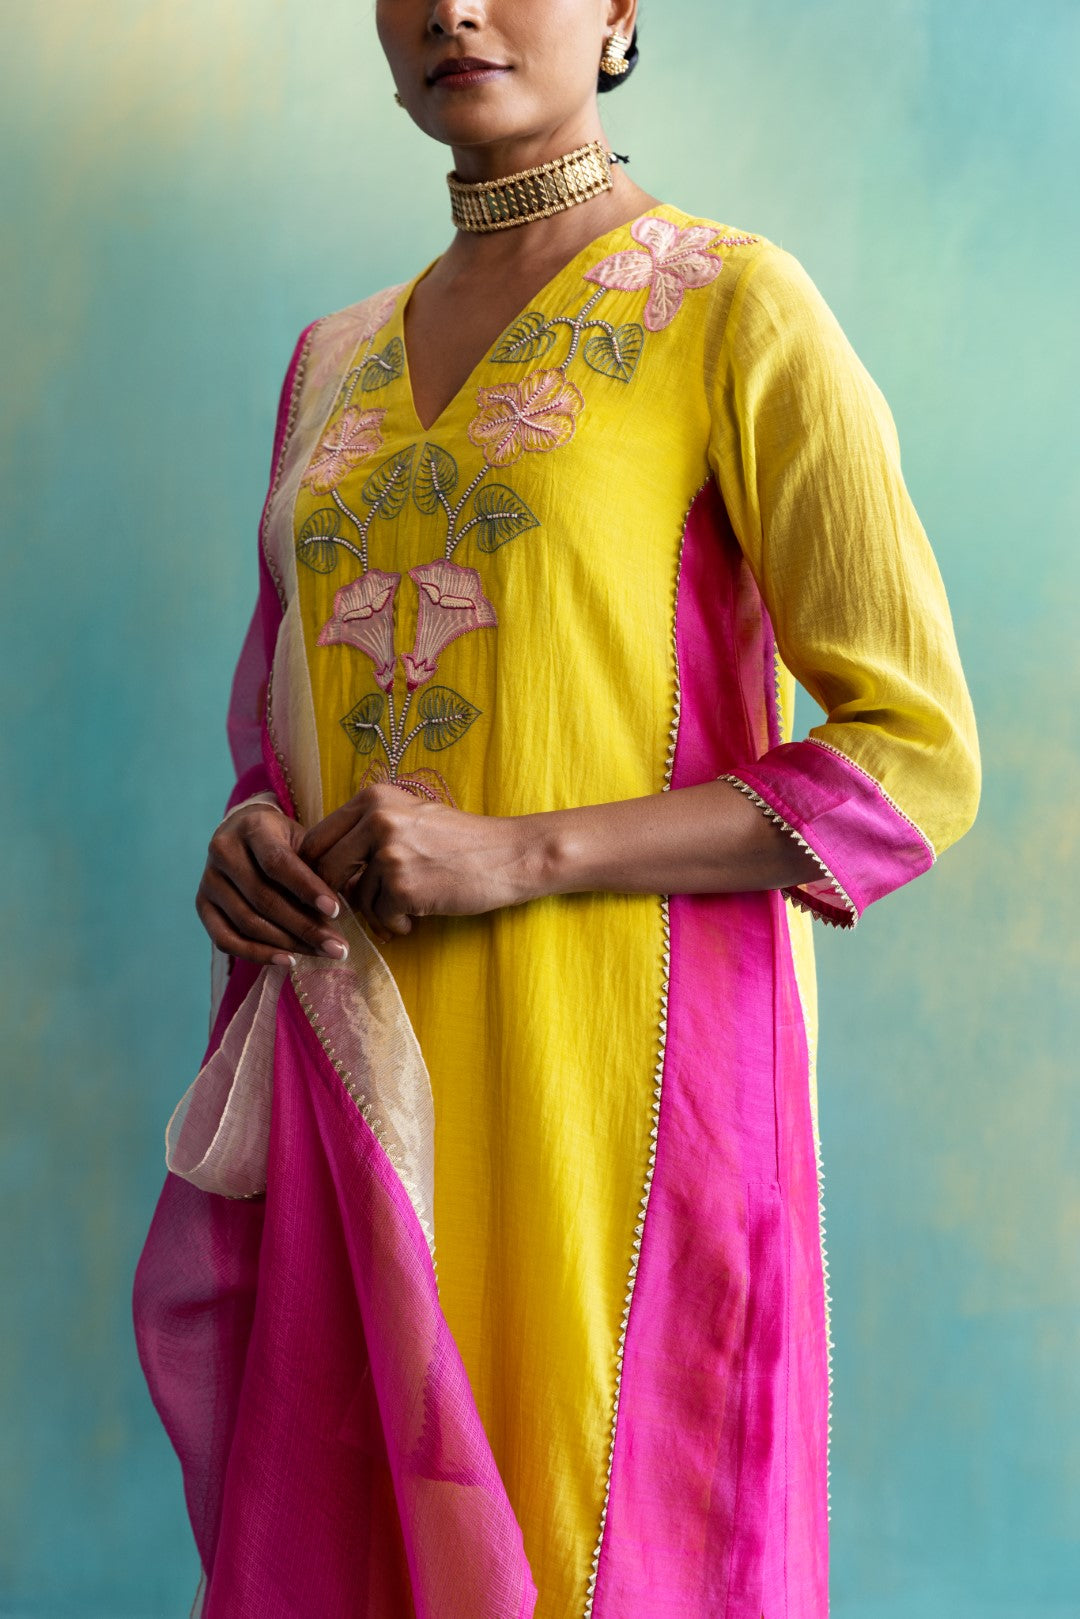 DIL-KASH YELLOW AND PINK COLOUR BLOCK CHANDERI V-NECK FLORAL EMBROIDERY KURTA